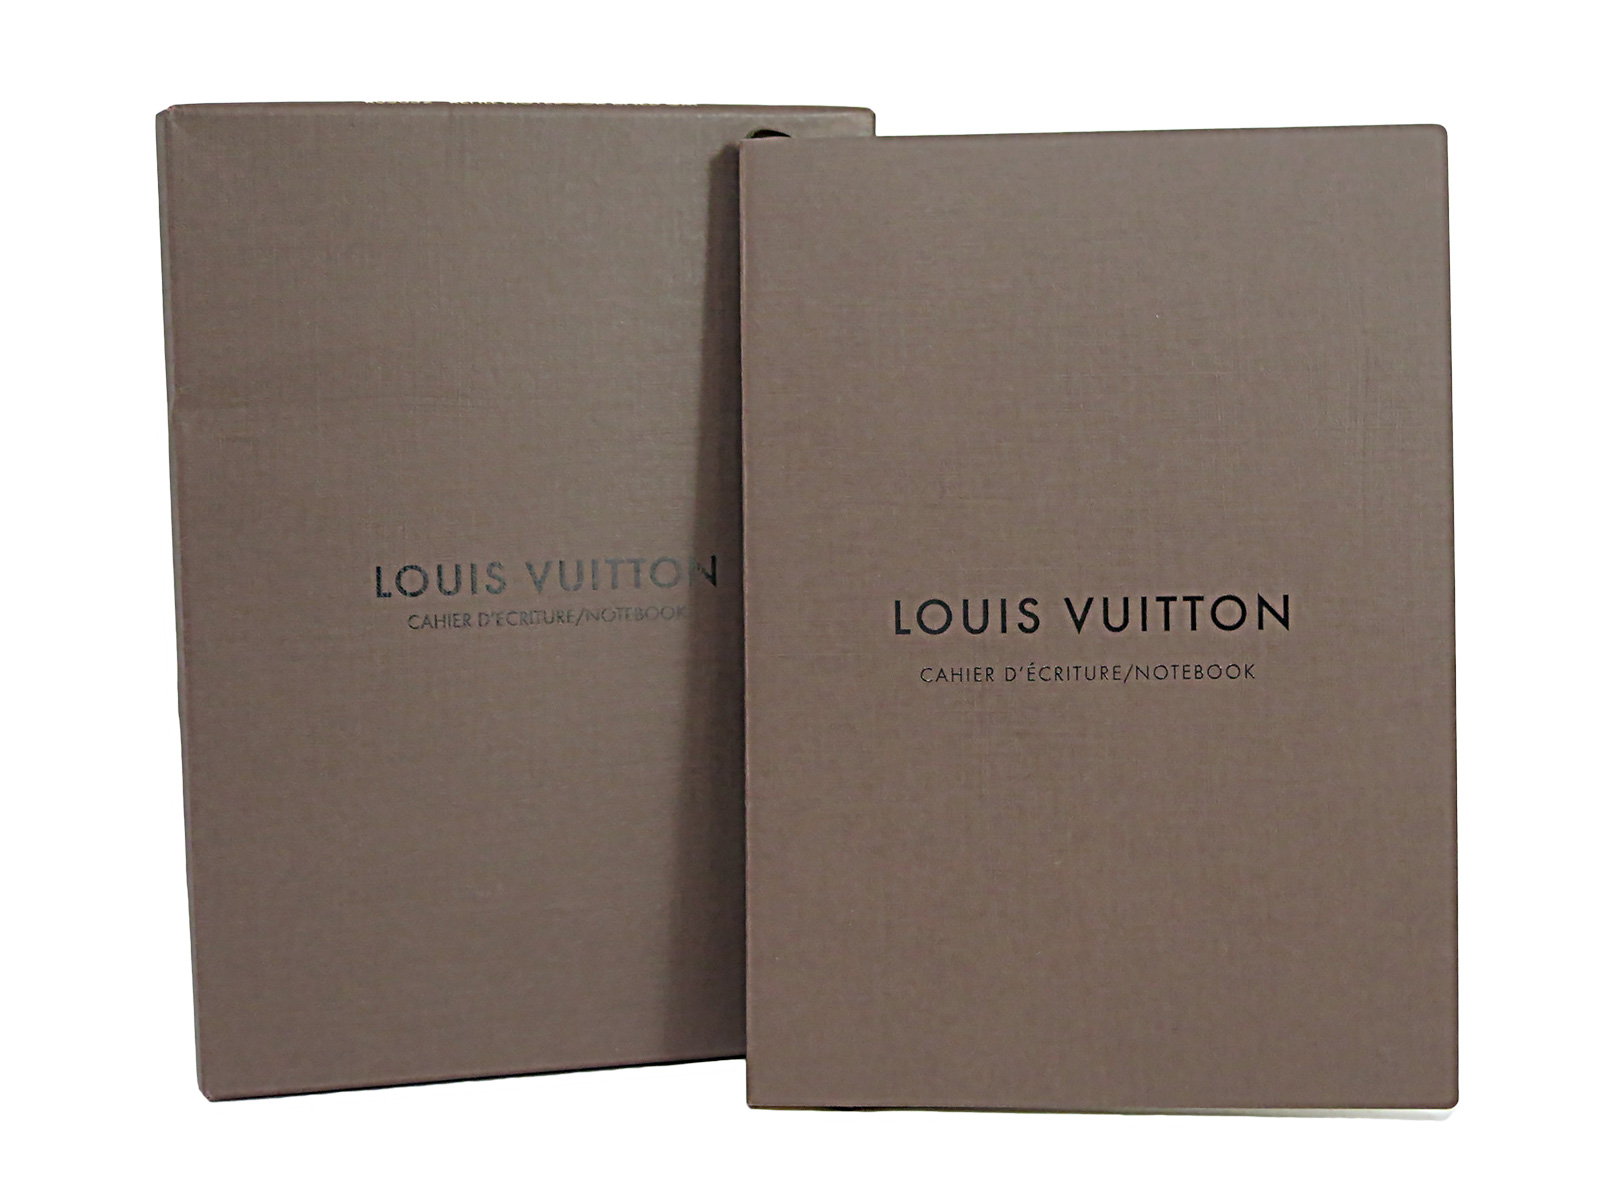 Auth Louis Vuitton Refill Notebook Lined GM Note Refill Brown Paper - e13020 | eBay